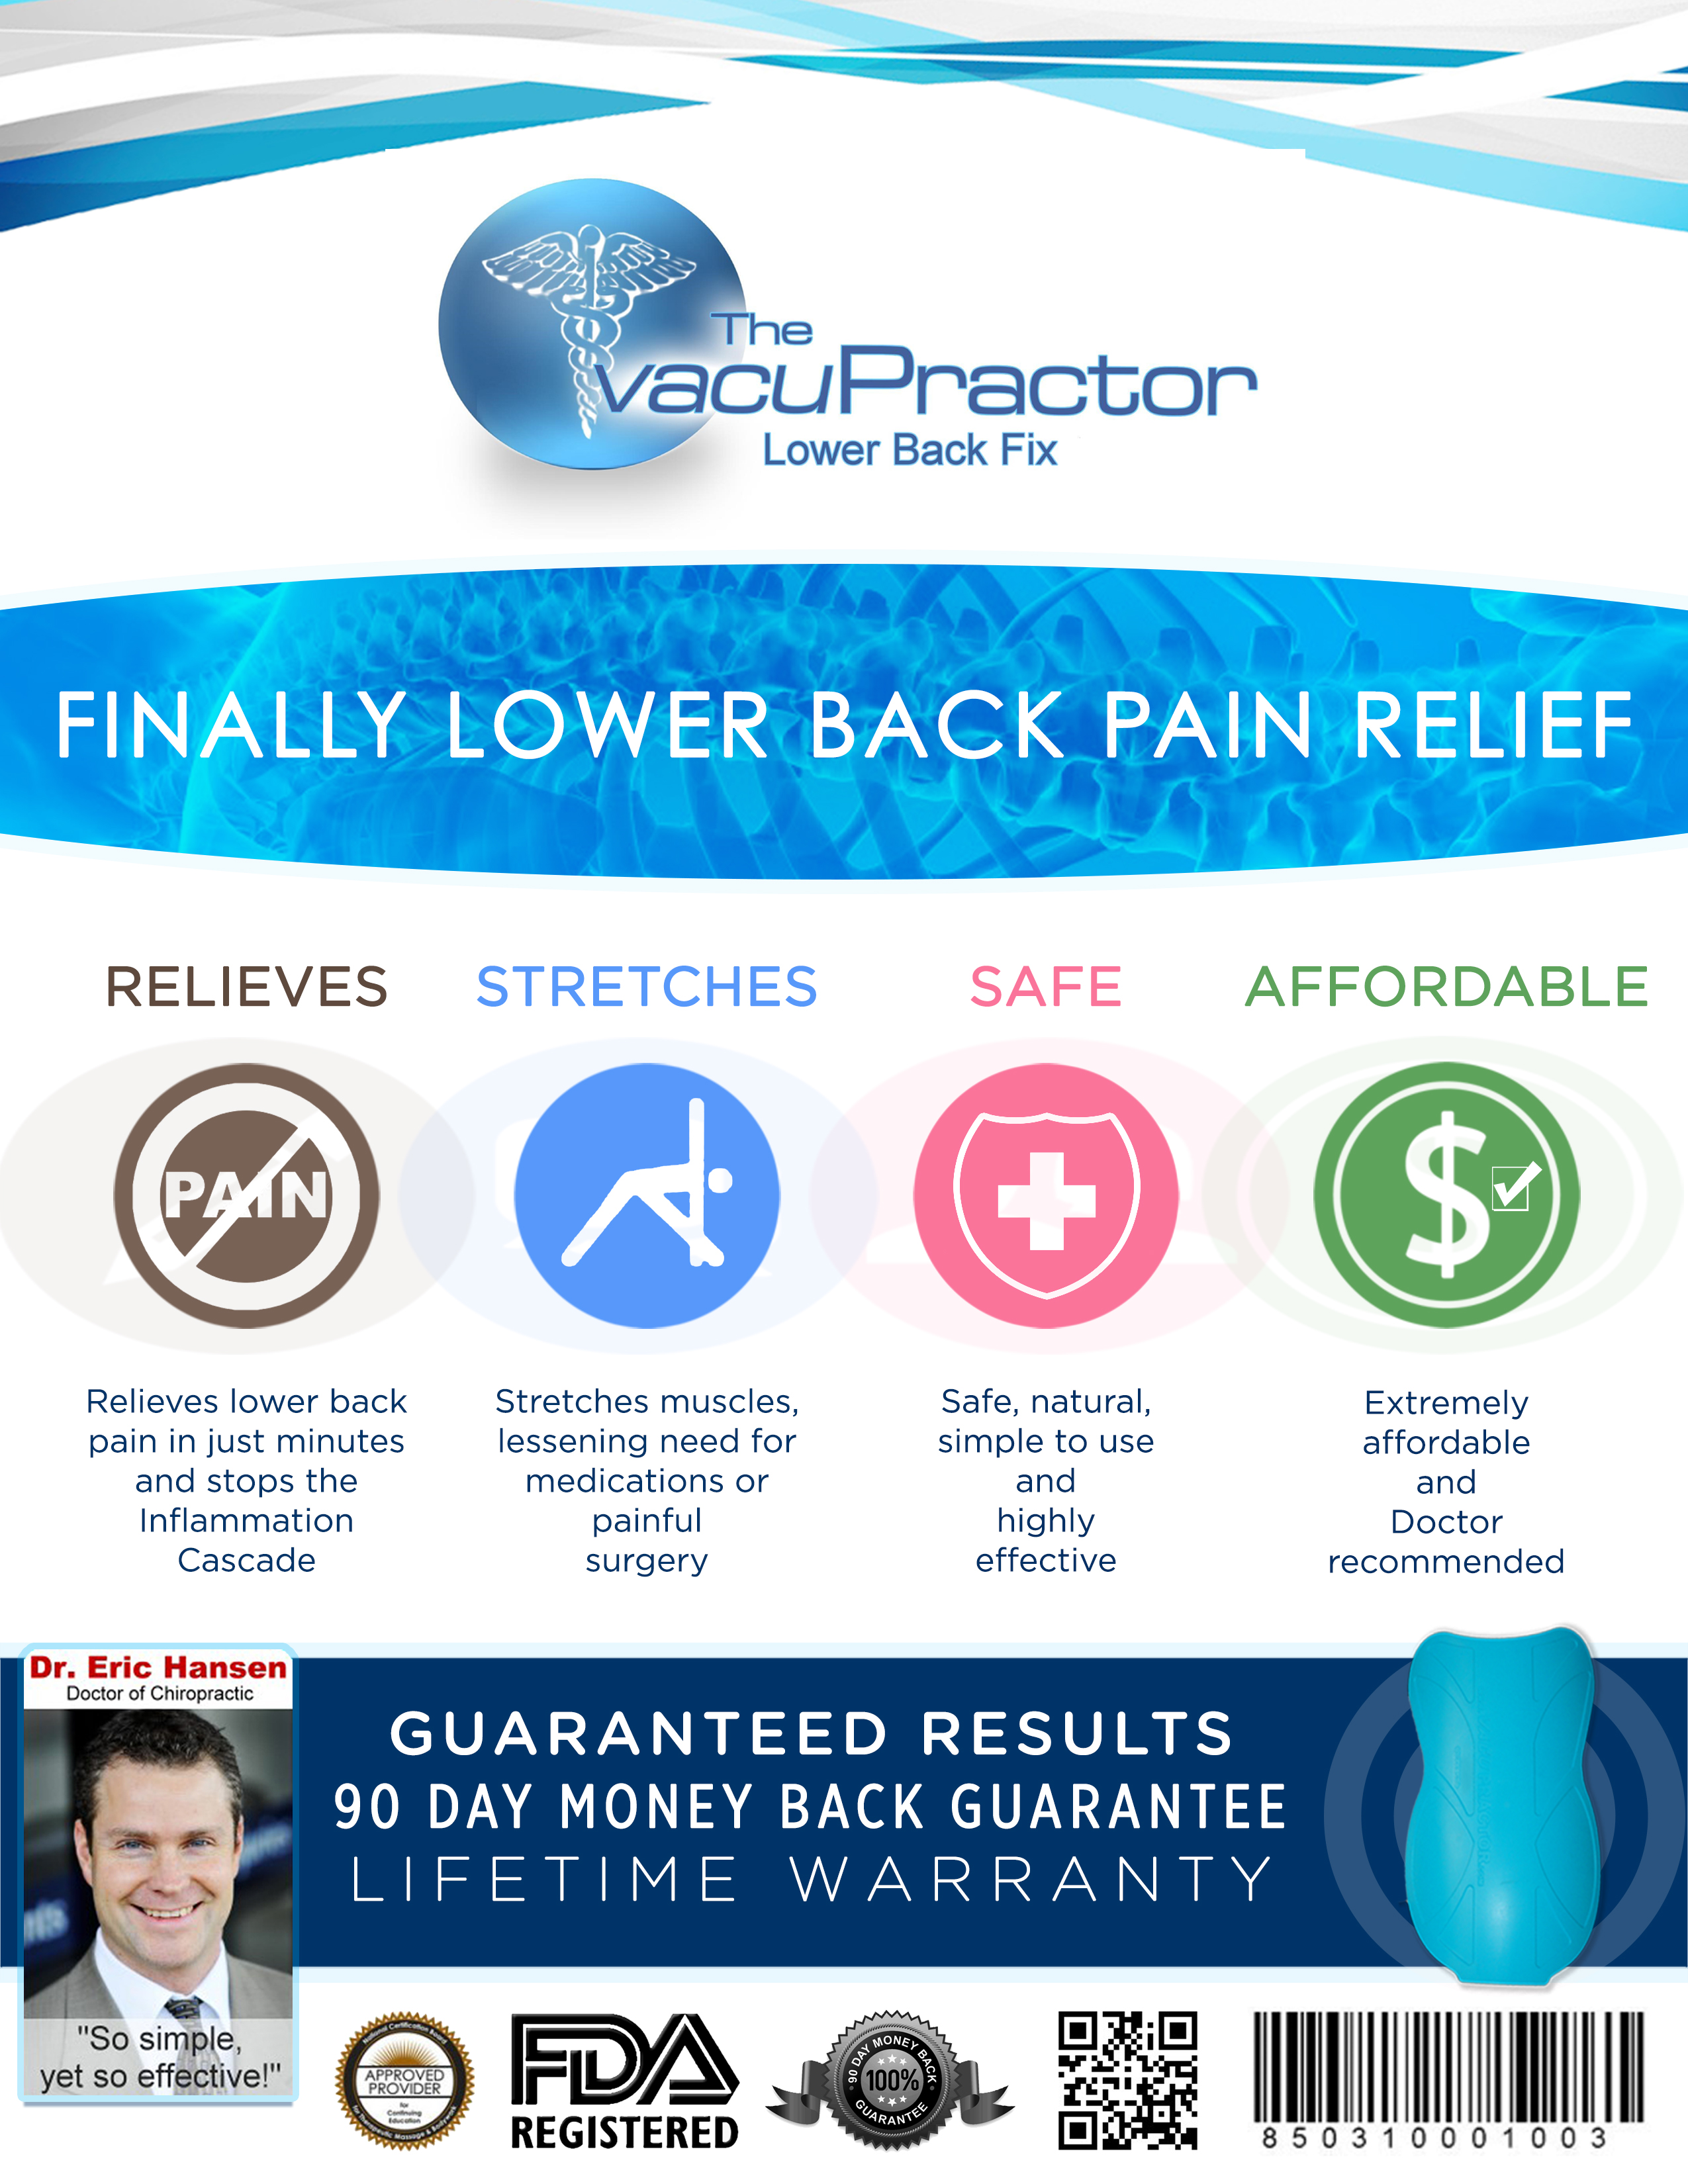 The VacuPractor, Pain relief without medications